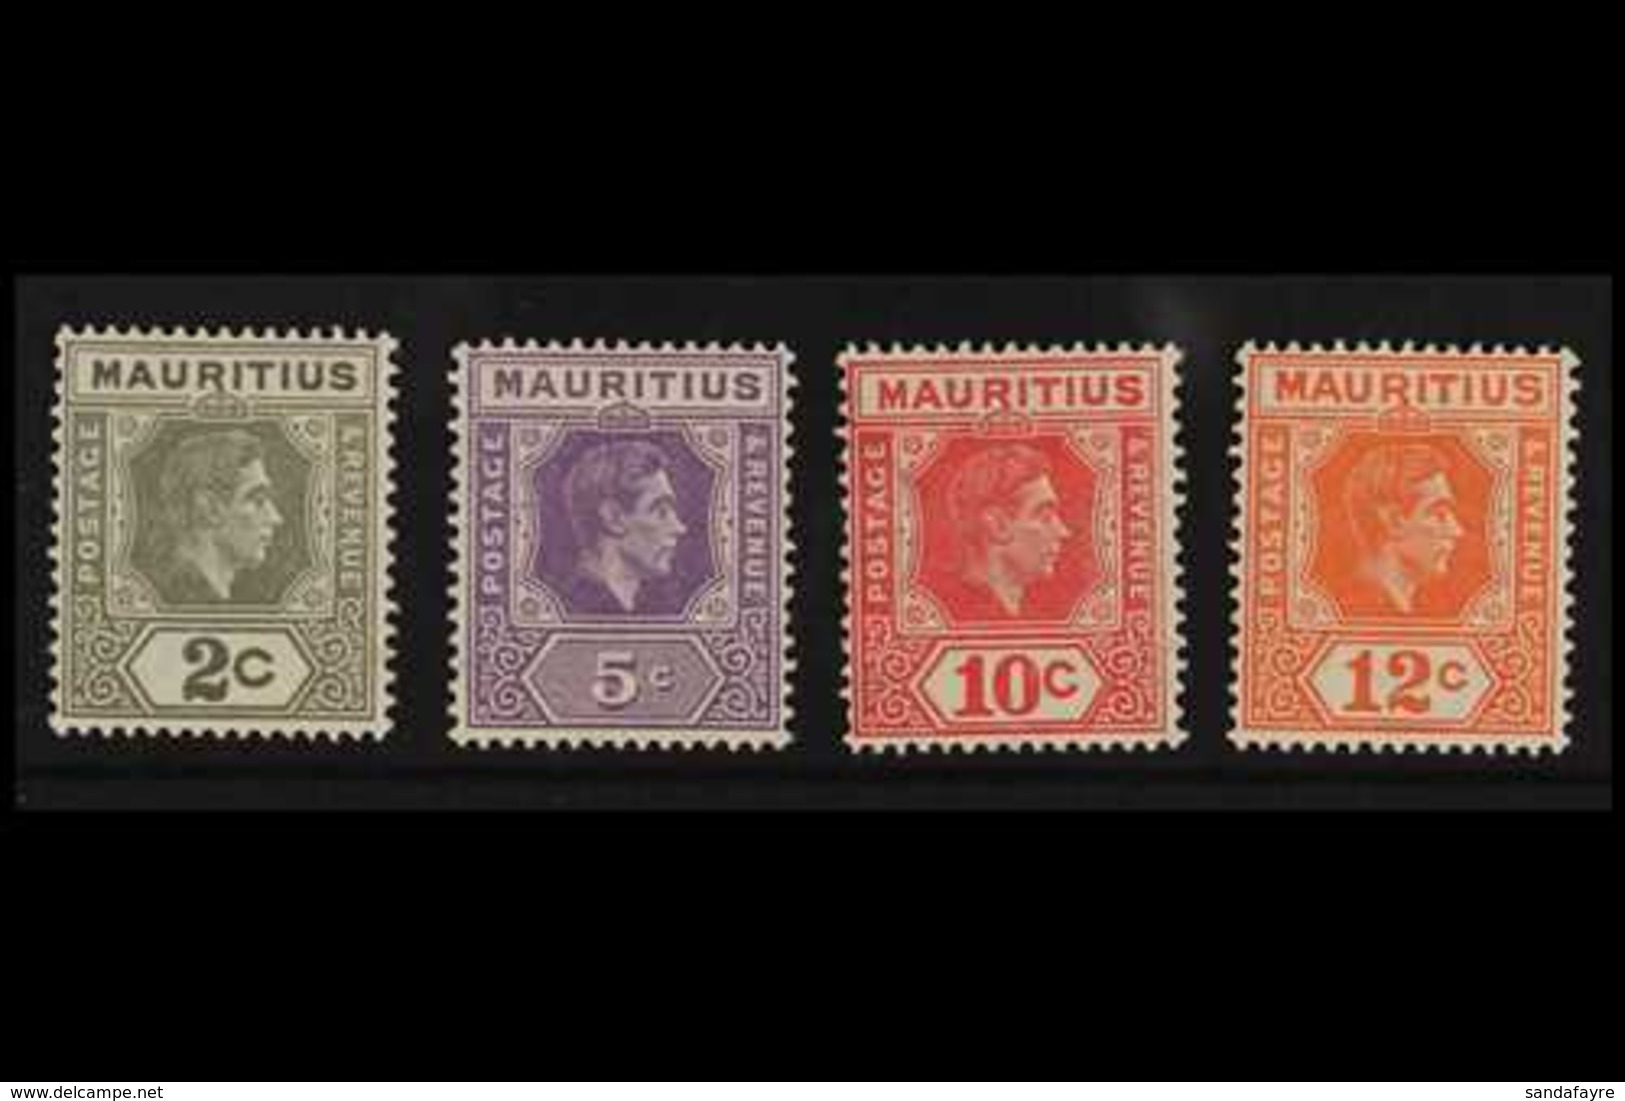 1938-49 KGVI 2c, 5c, 10c & 12c Perf.15x14 Printings, SG 252a, 255b, 256c, 257a, Very Fine Mint (4 Stamps) For More Image - Mauritius (...-1967)